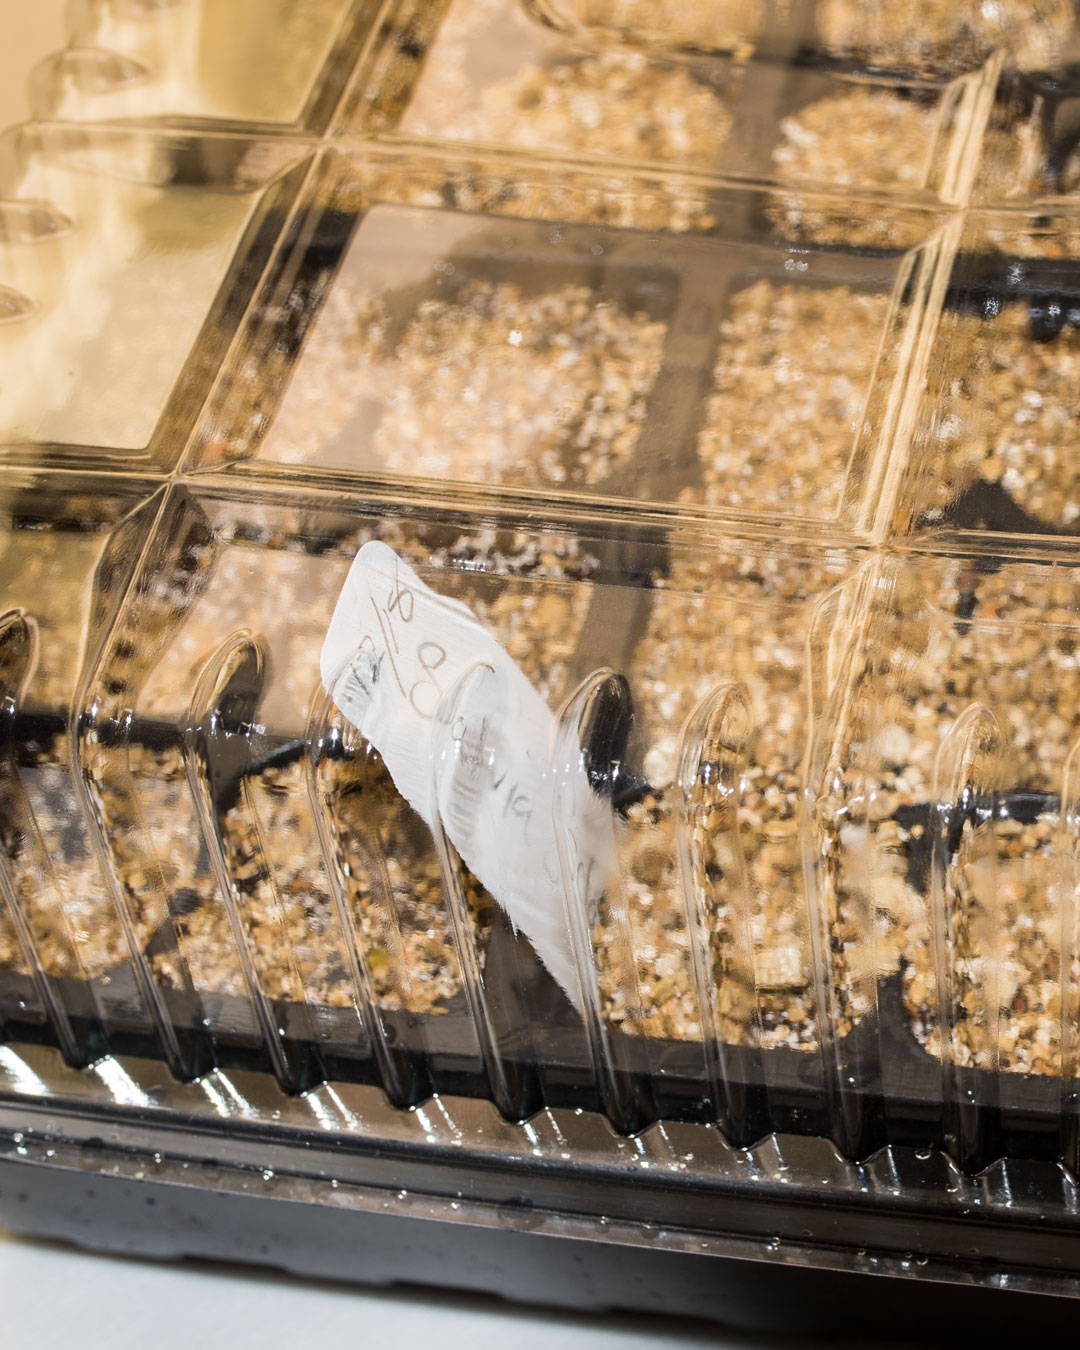 Covered seed starting tray